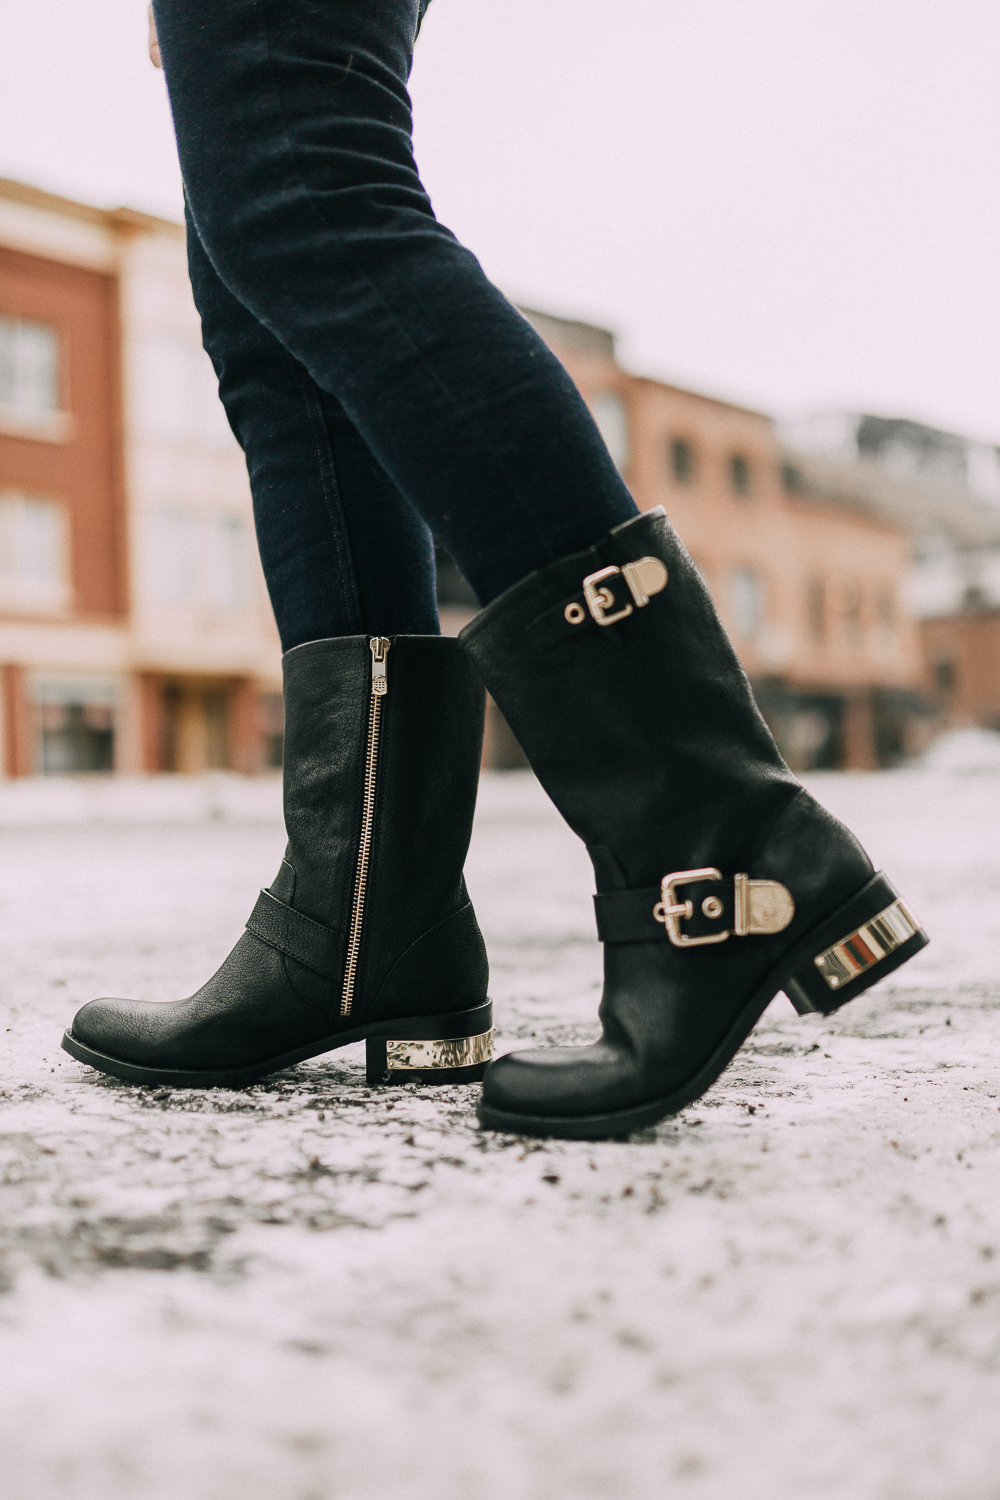 Vince Camuto Sale, Fashion blogger Erin Busbee of BusbeeStyle.com wearing the Vince Camuto Winchell moto boots with dark wash skinny jeans in Telluride, CO